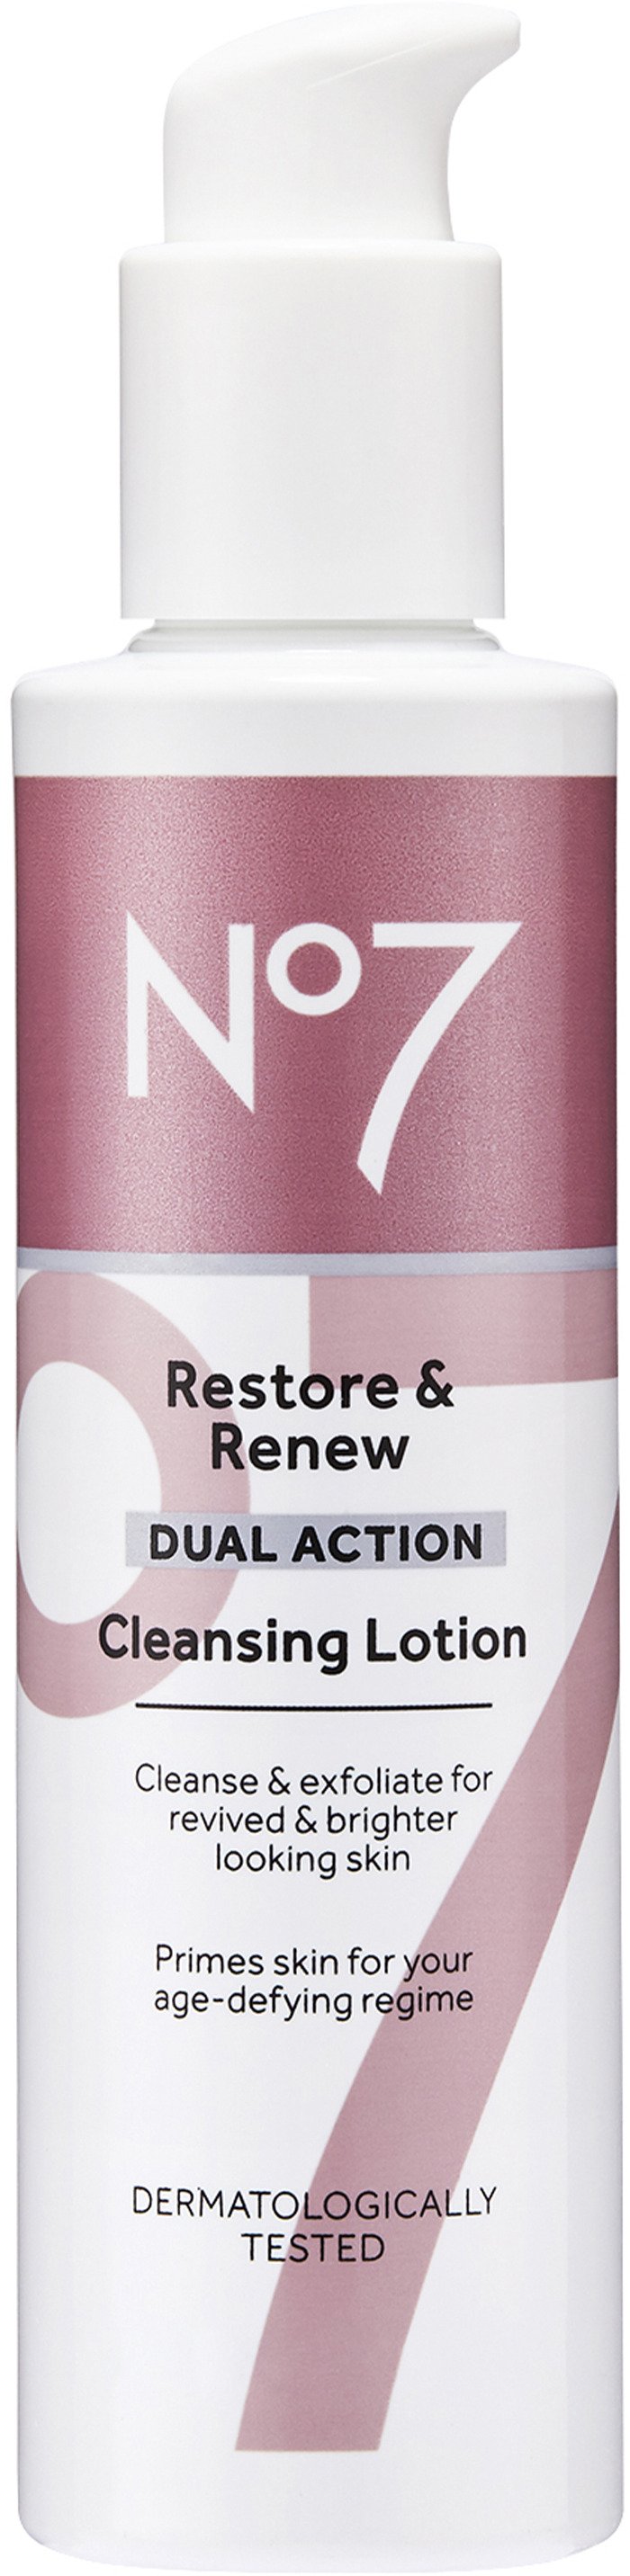 No7 Restore & Renew Cleansing Lotion 200 ml